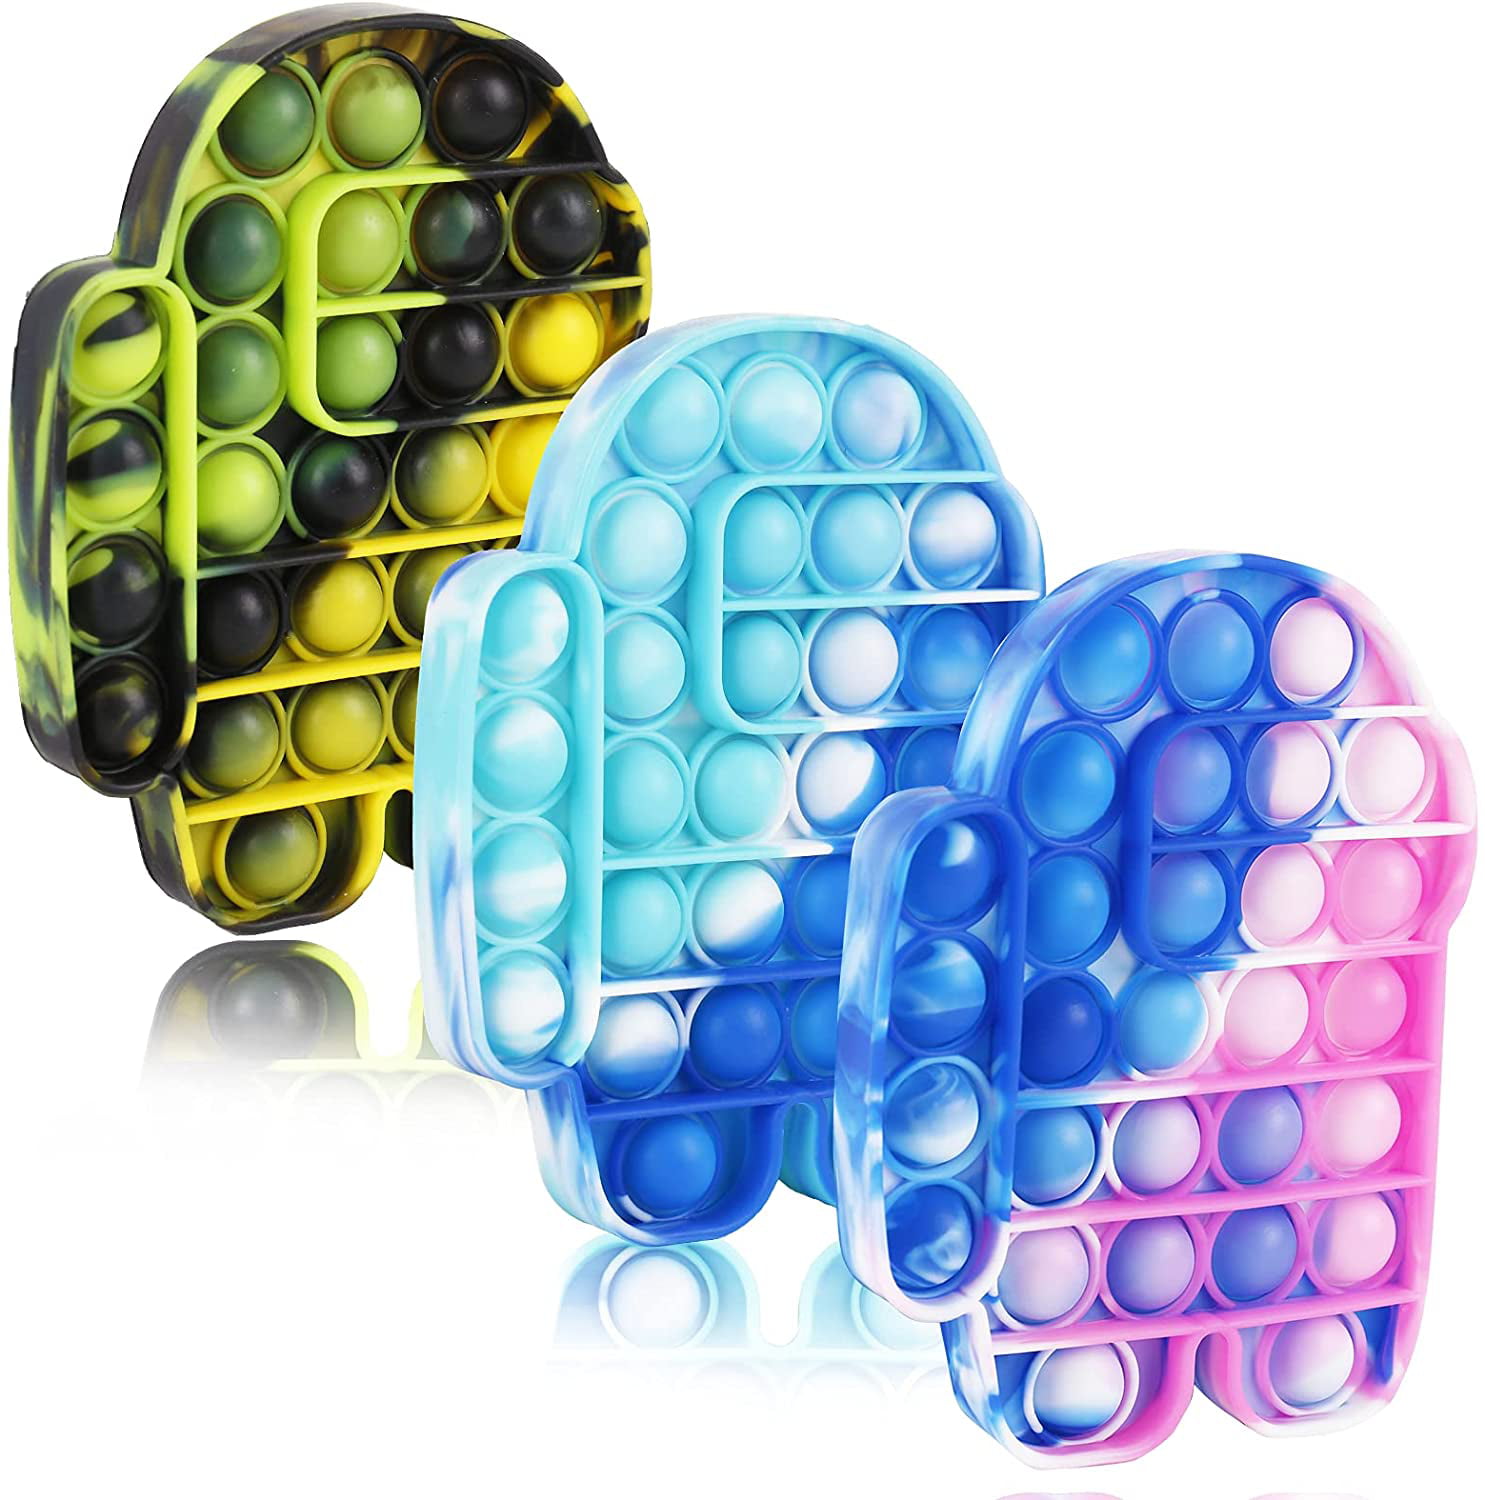 3PCS School Office Push Pop Bubble Sensory Toy Stress Reliever Silicone Squeeze Toy ADHD or Autism Good for Kids with ADD Etc Suitable for Many Occasions,Such as Home 